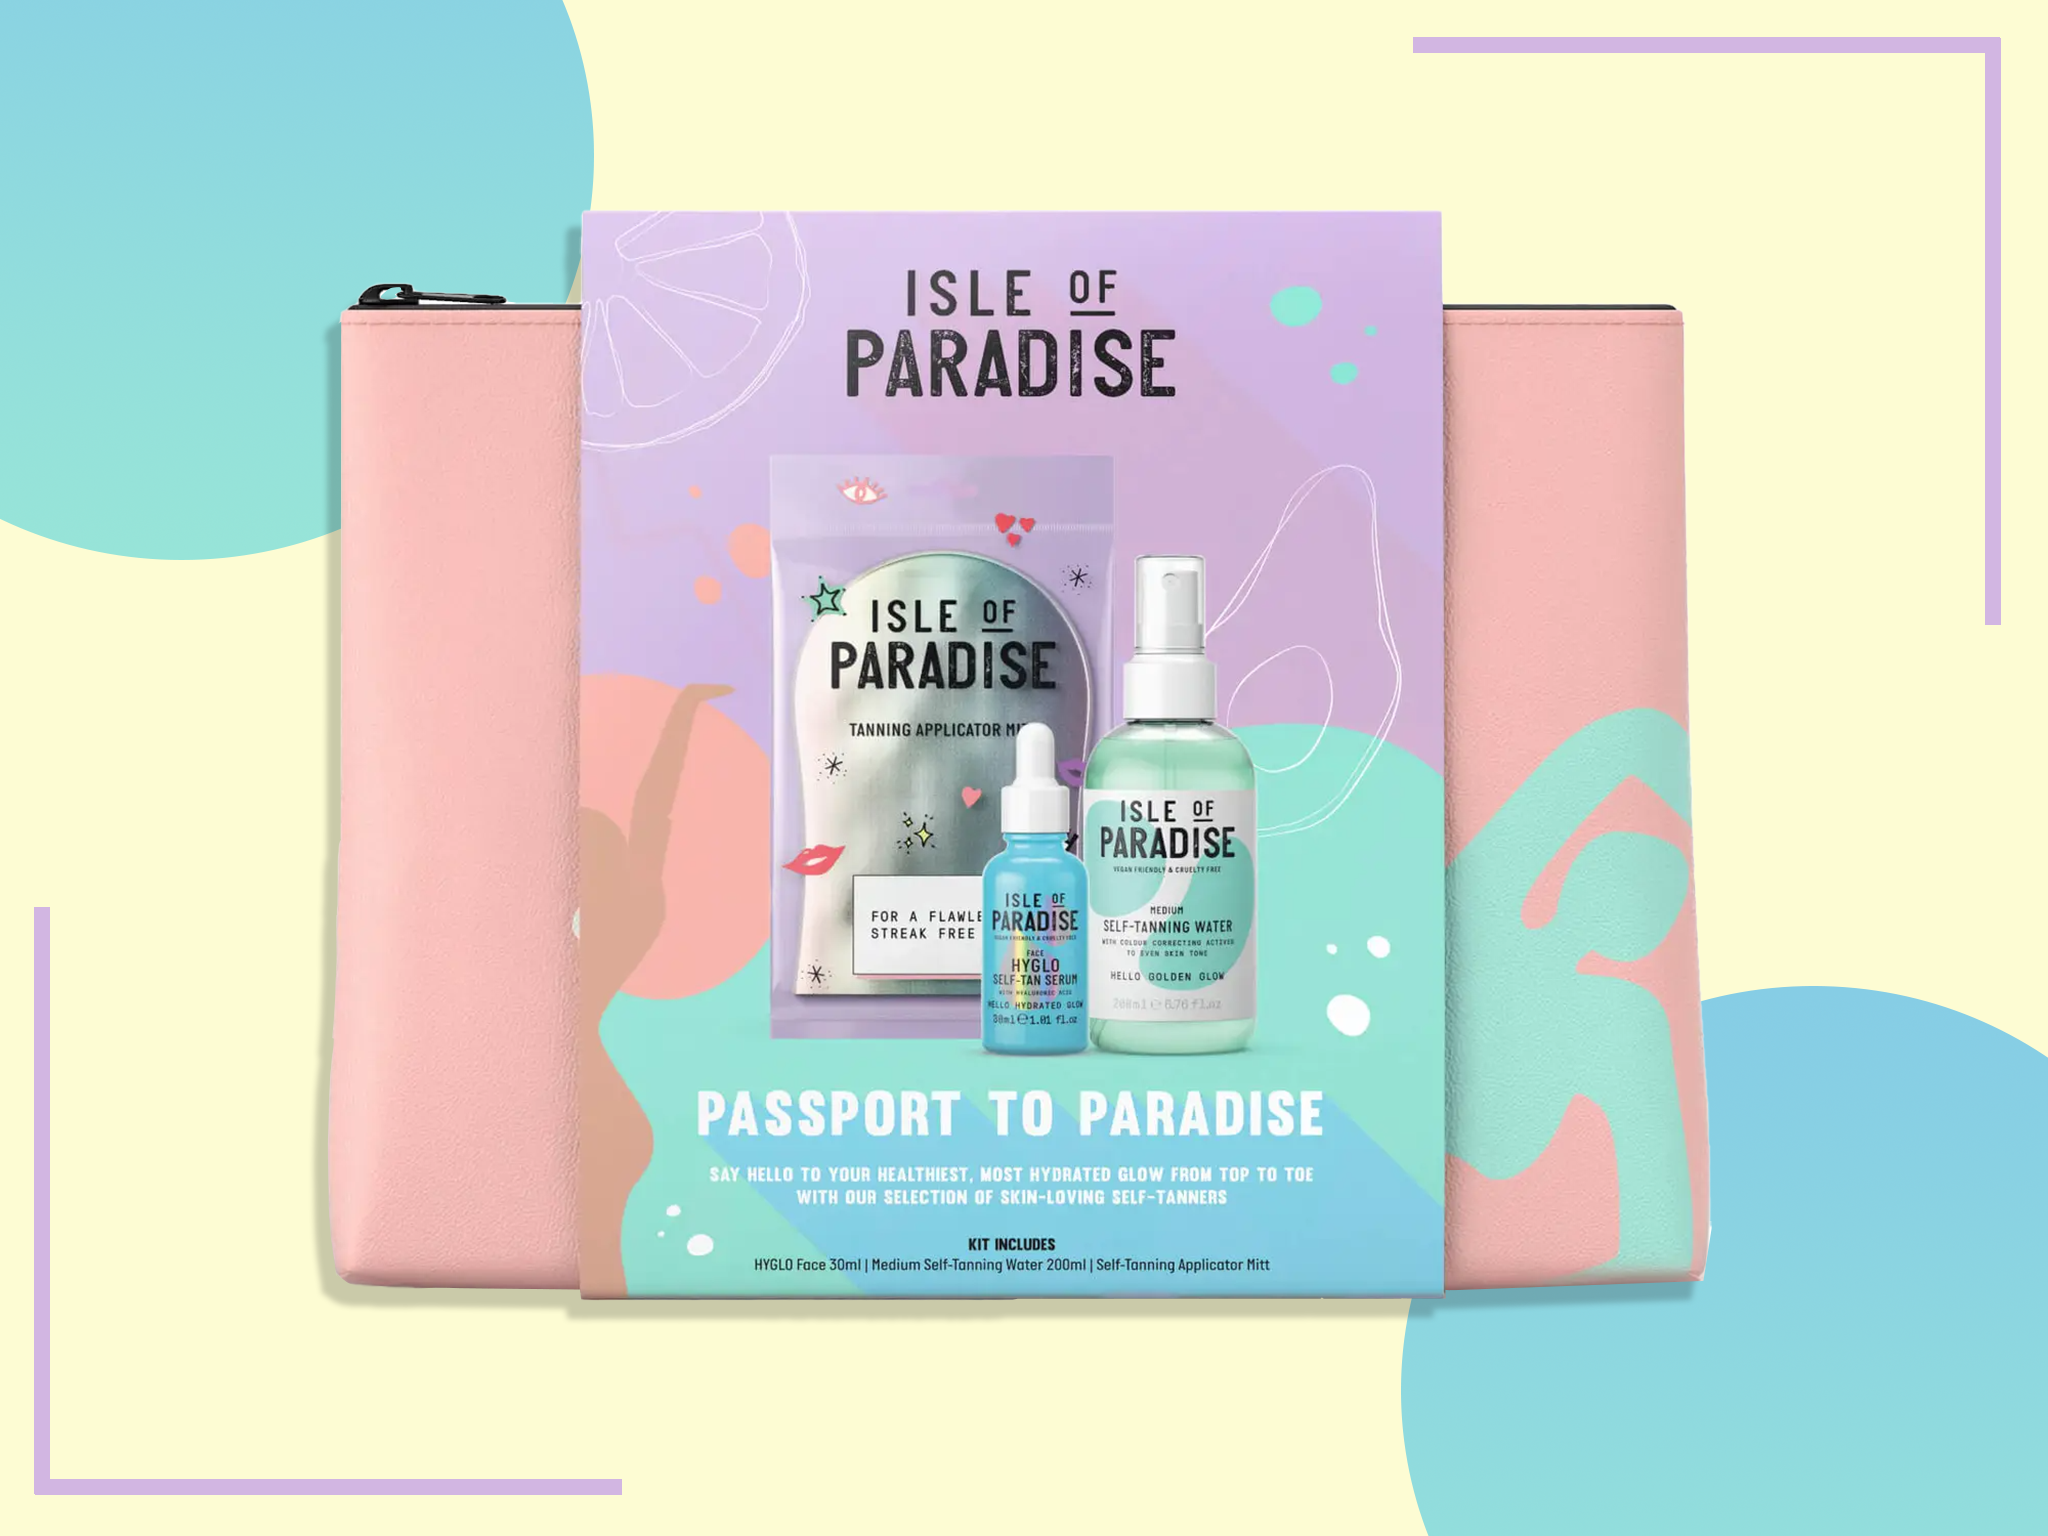 Isle of Paradise’s innovative range of formulas allows you to achieve a flawless summer glow